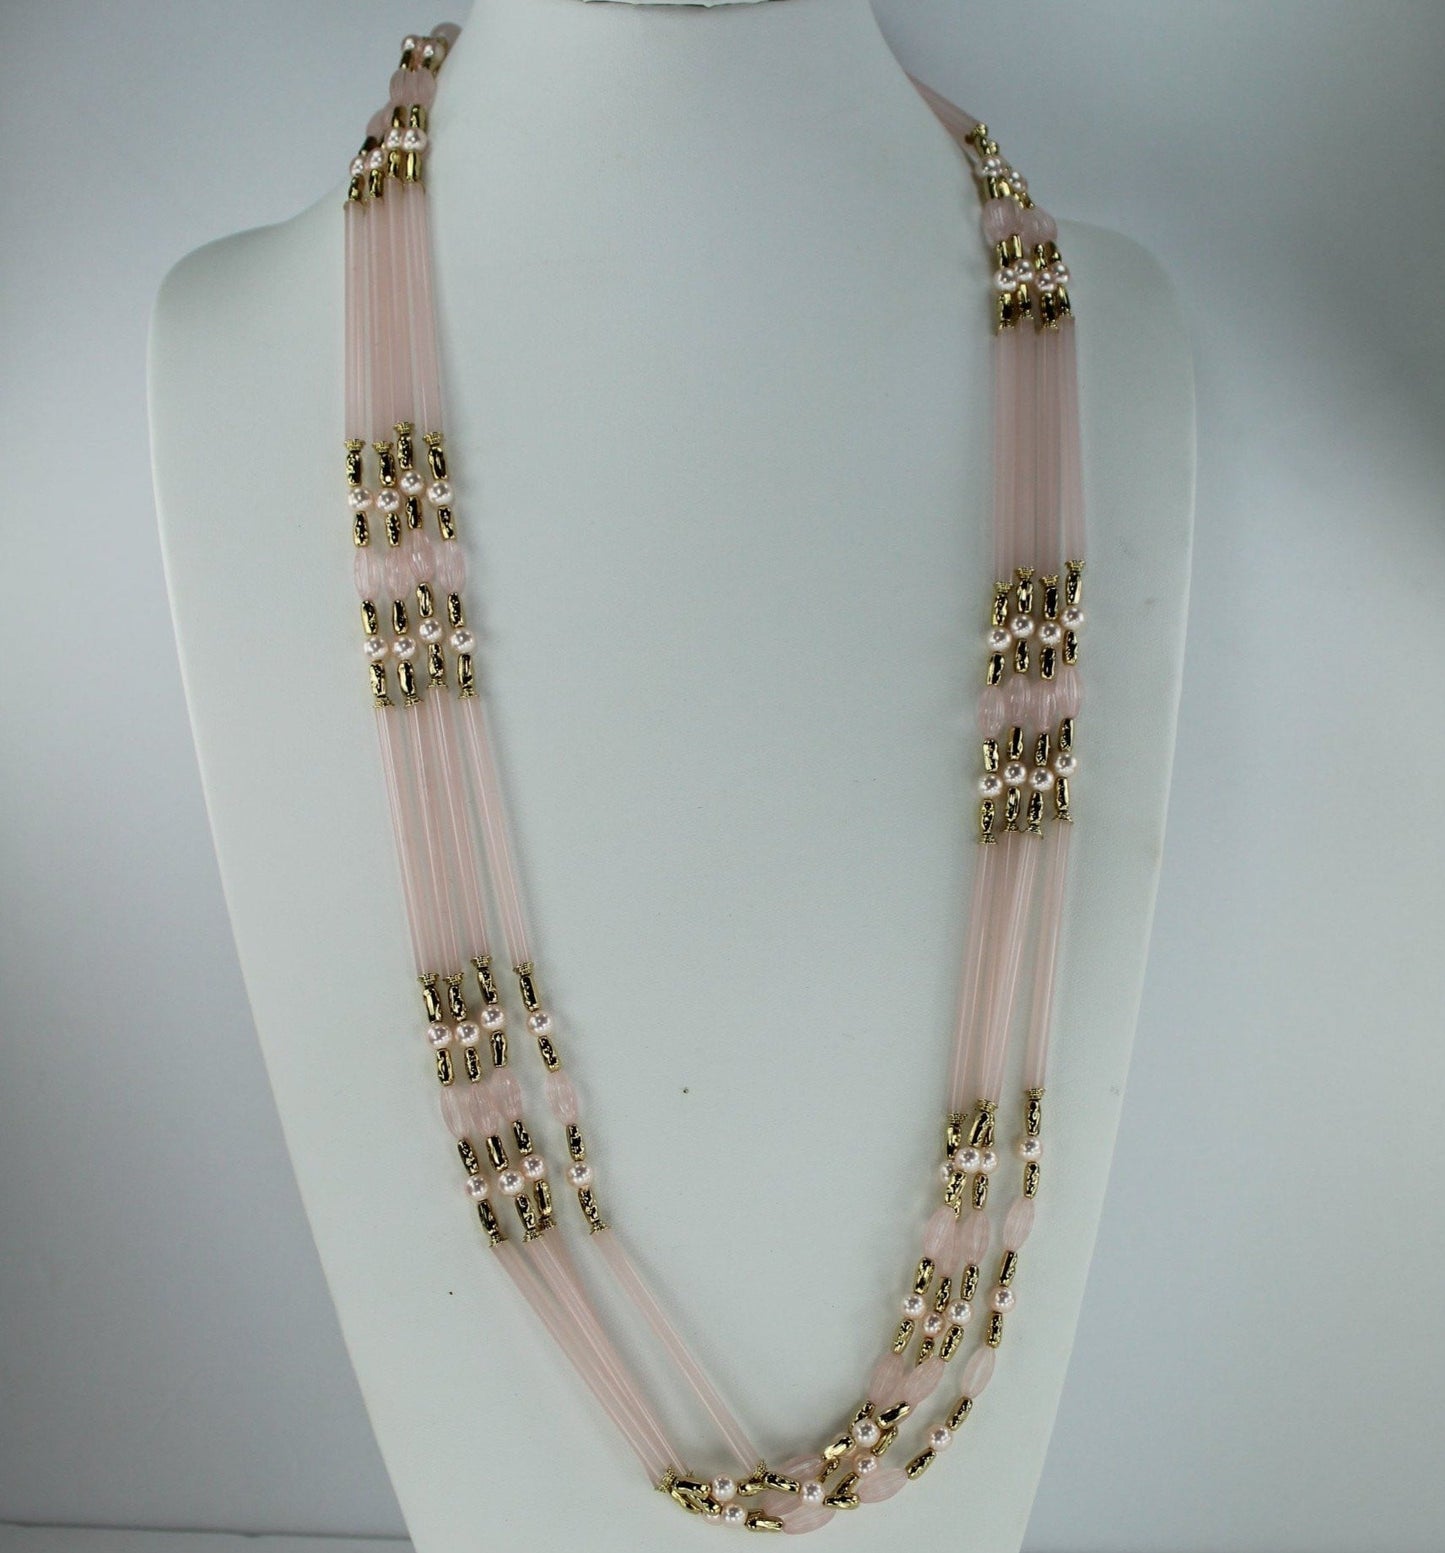 Marvella Pearl Necklace Pink Beads New with Tag 4 strand 34" unworn